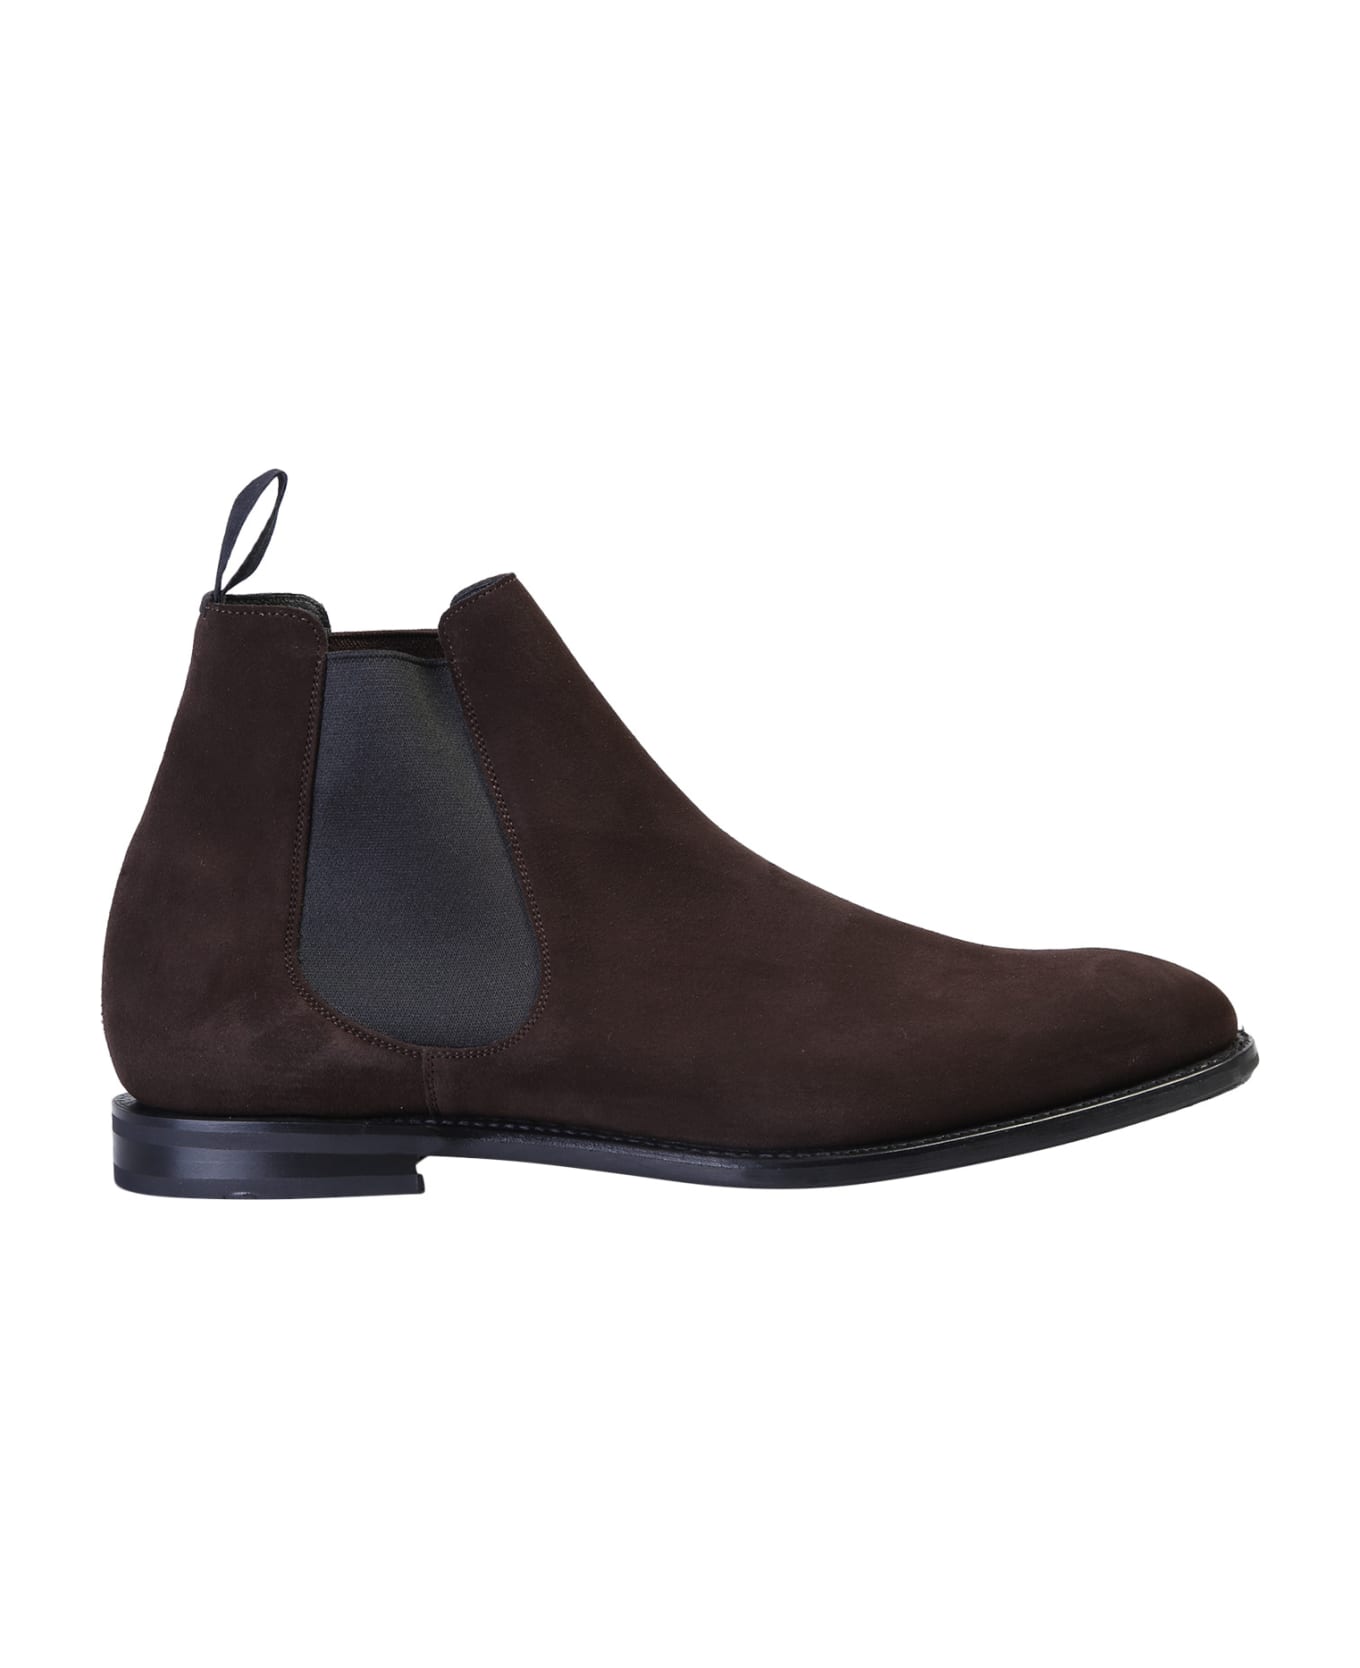 Church's Prenton Ankle Boots - Brown